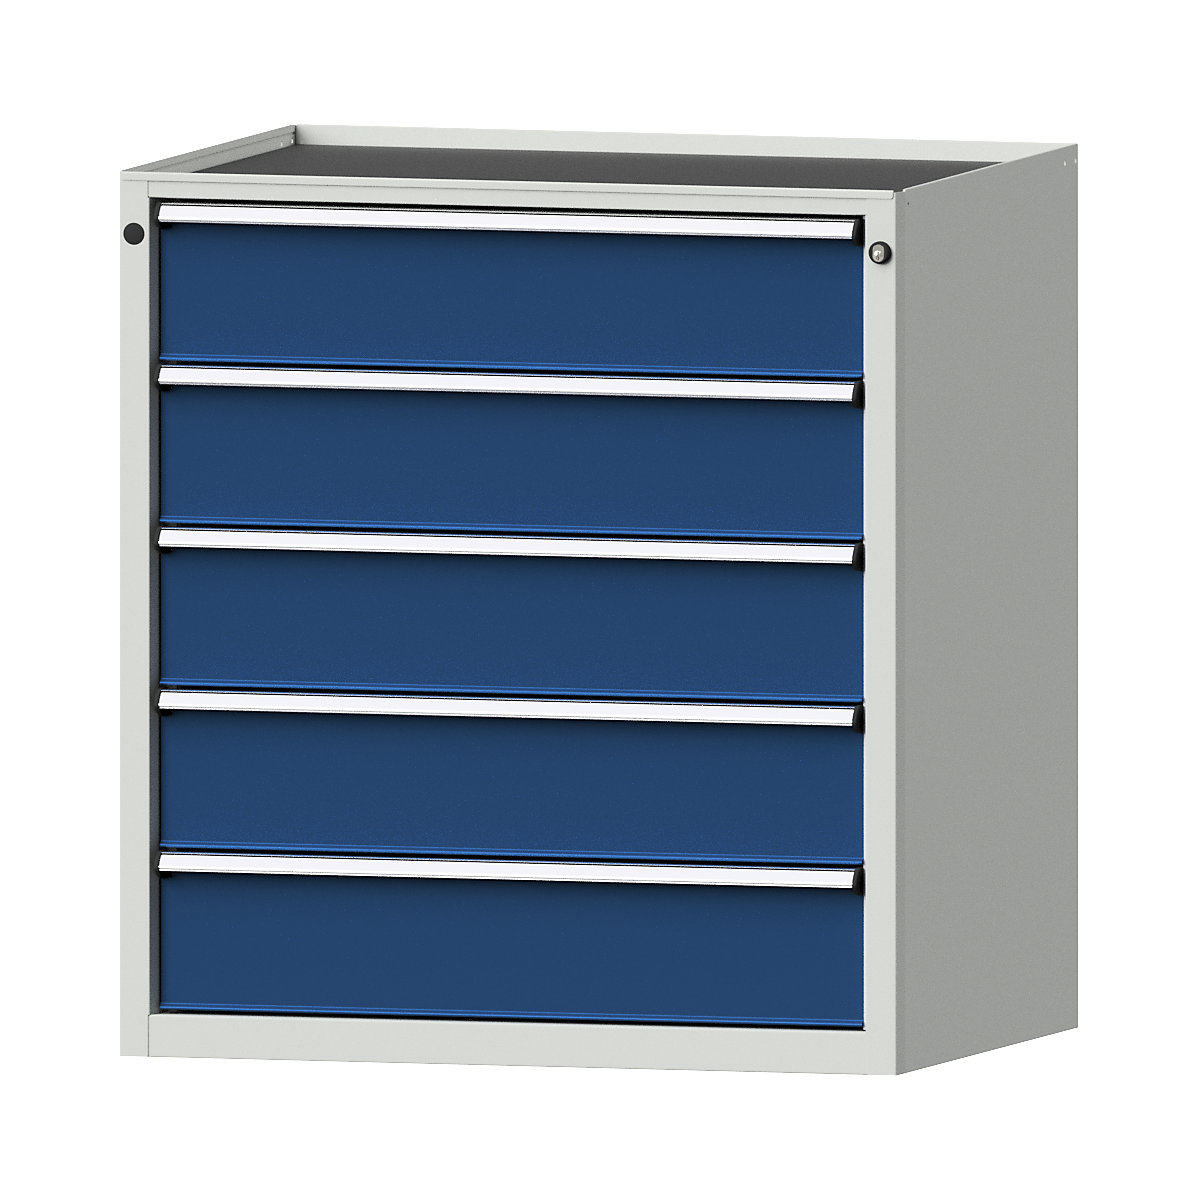 Drawer cupboard – ANKE, WxD 910 x 675 mm, 5 drawers, height 980 mm, front in gentian blue-14